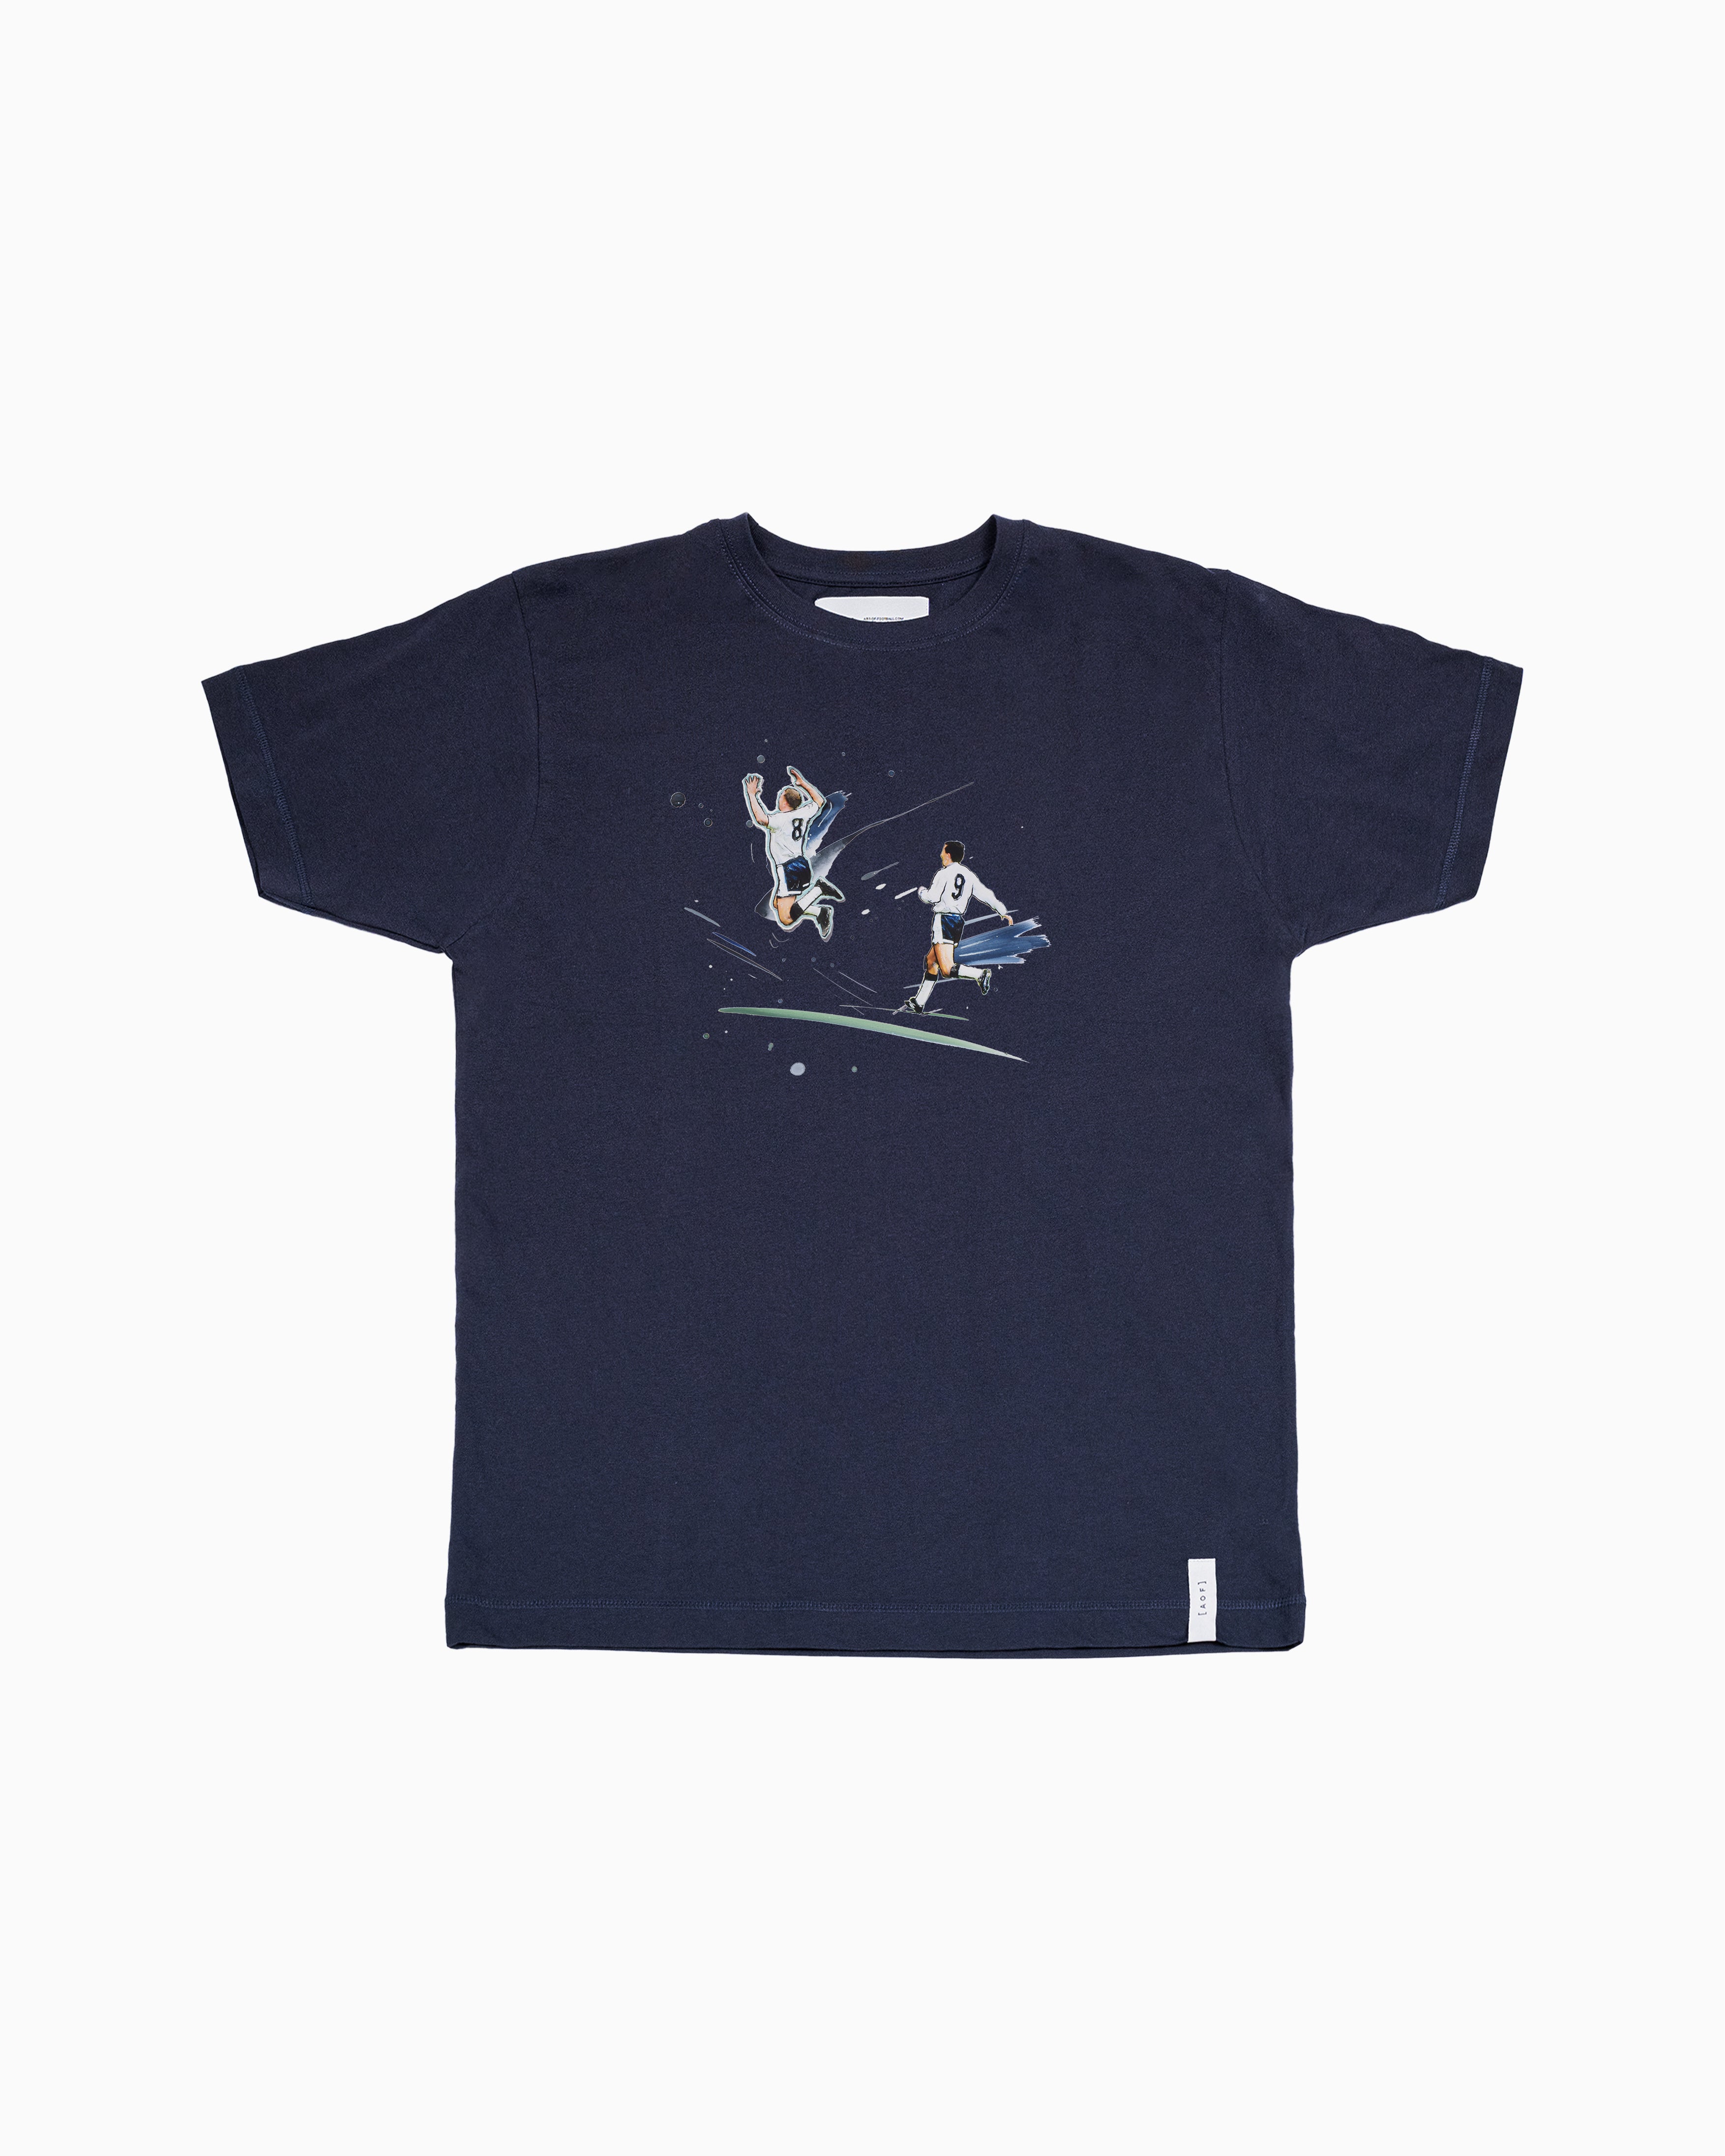 Leaping For Joy - Tee or Sweat